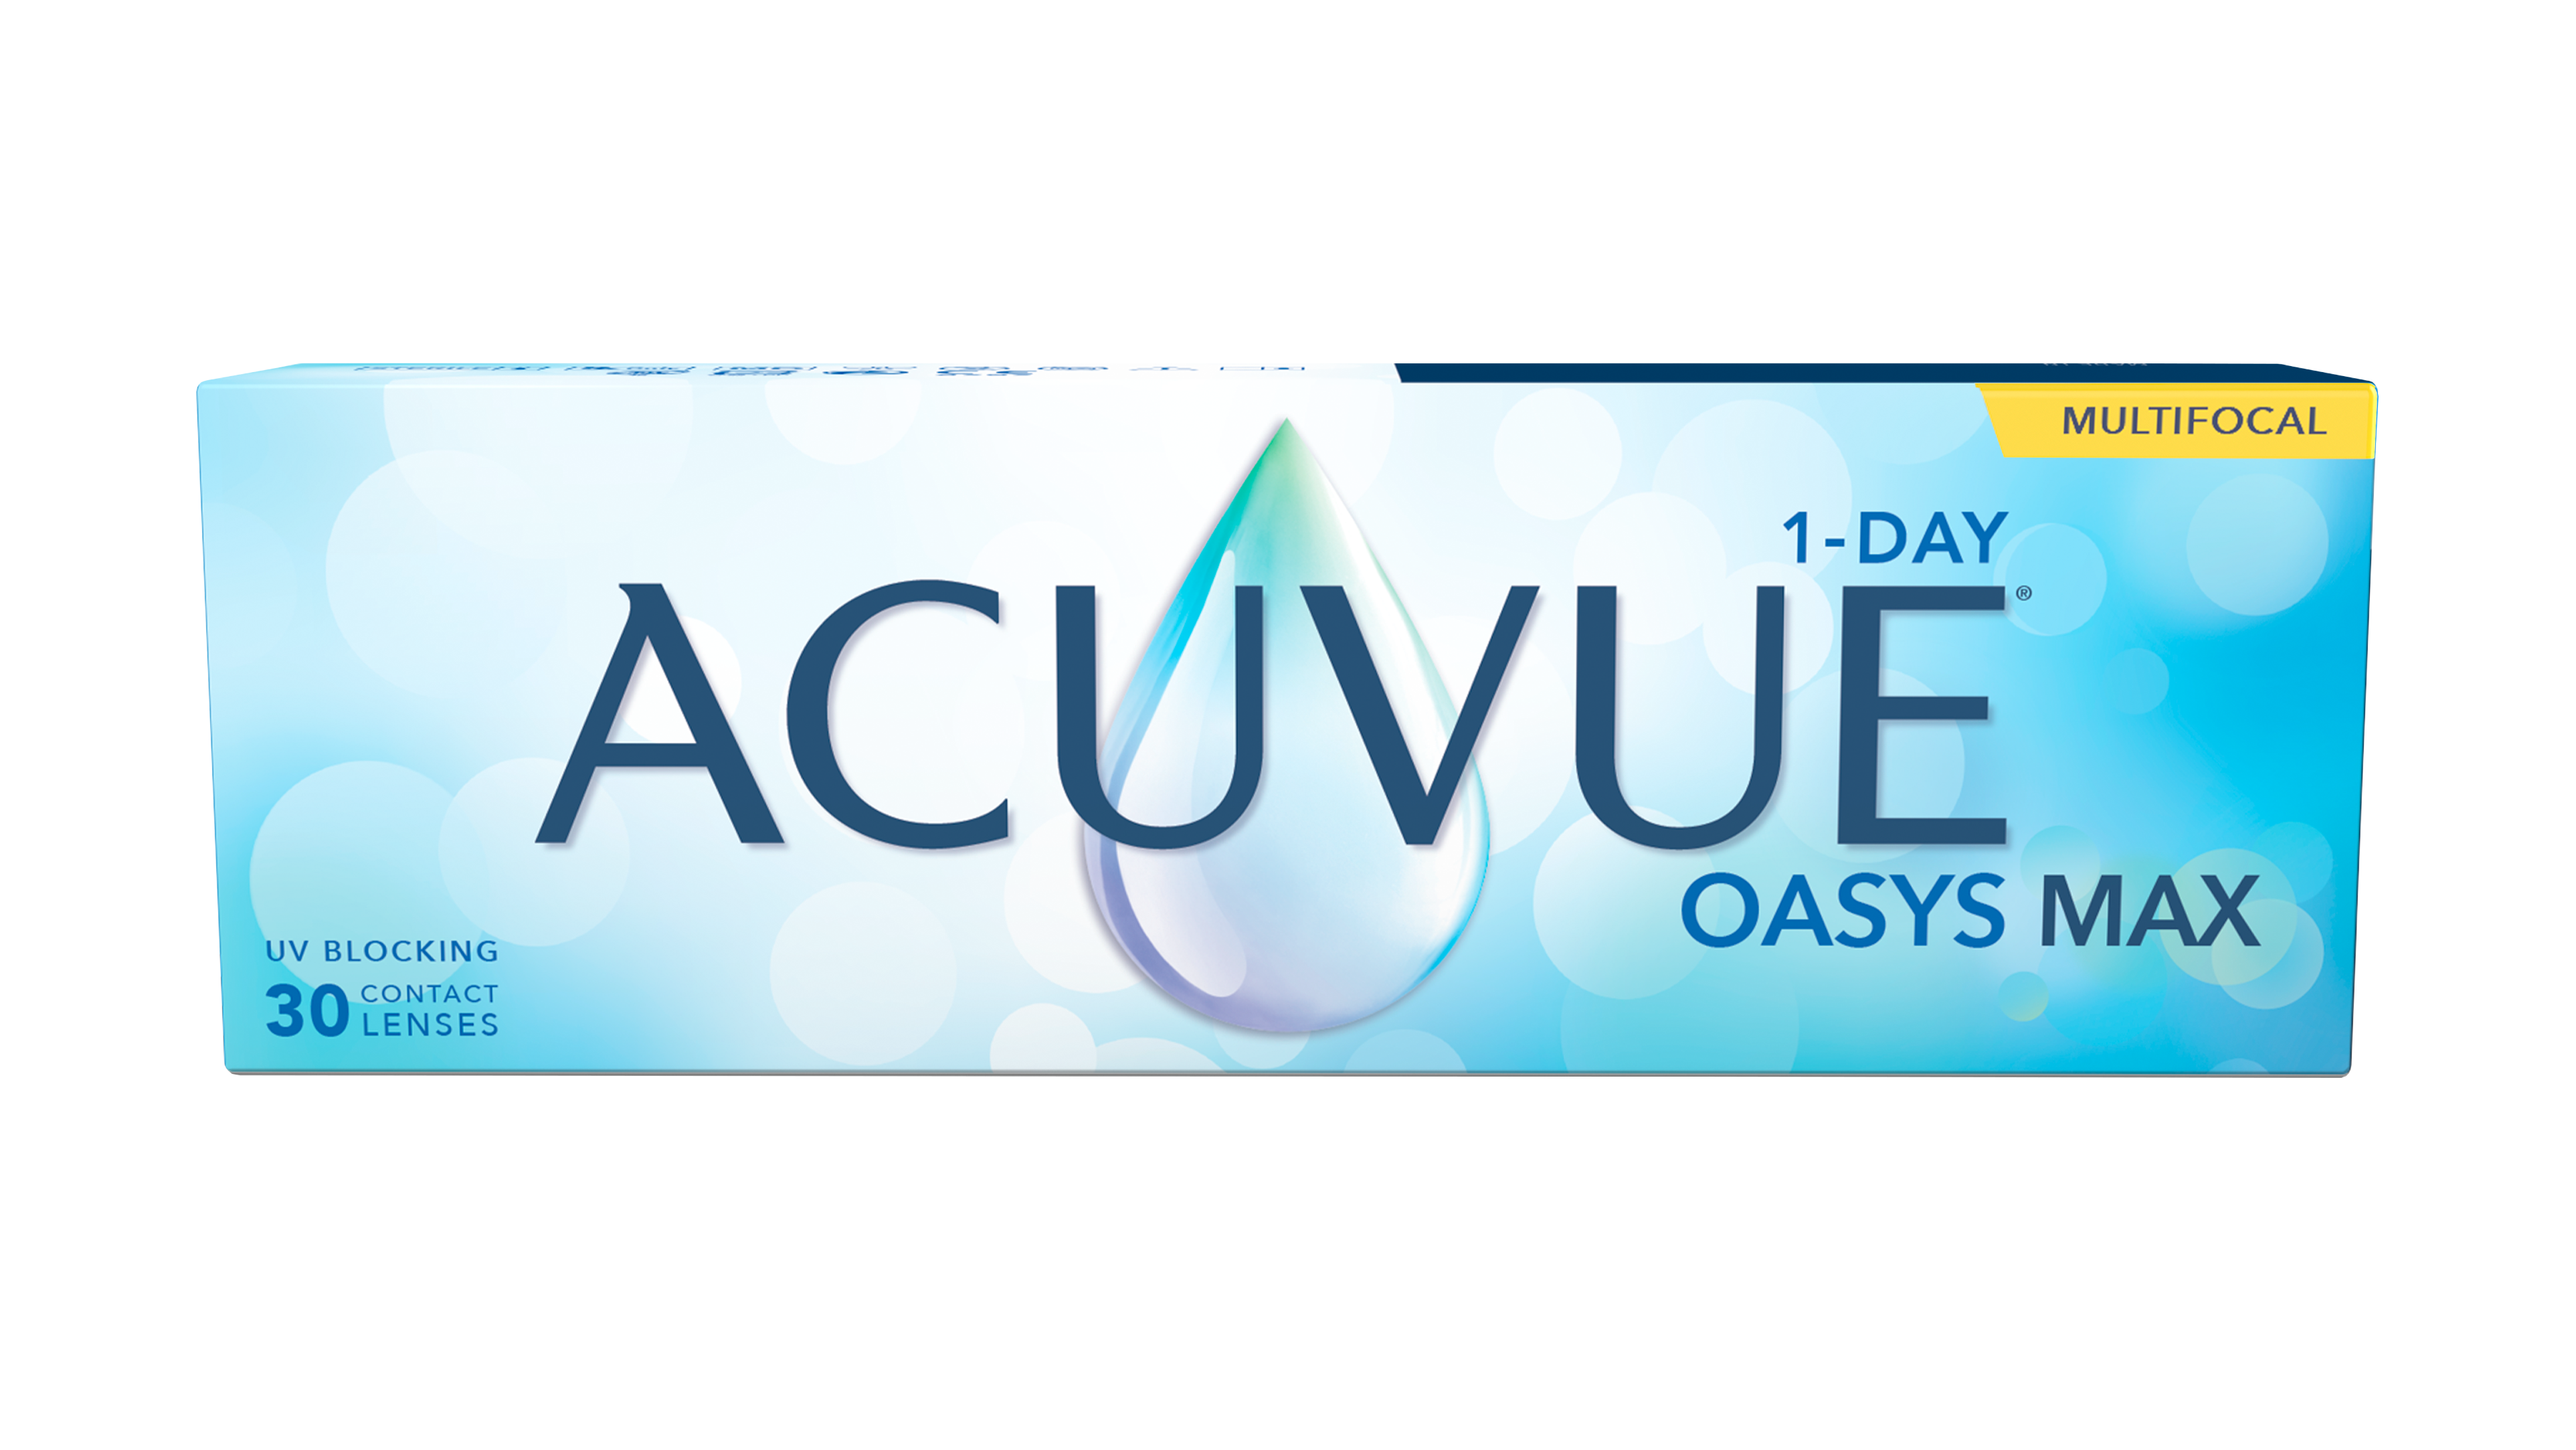 Front ACUVUE® ACUVUE® OASYS MAX 1-Day MULTIFOCAL 30er Tageslinsen 30 Linsen pro Packung, pro Auge